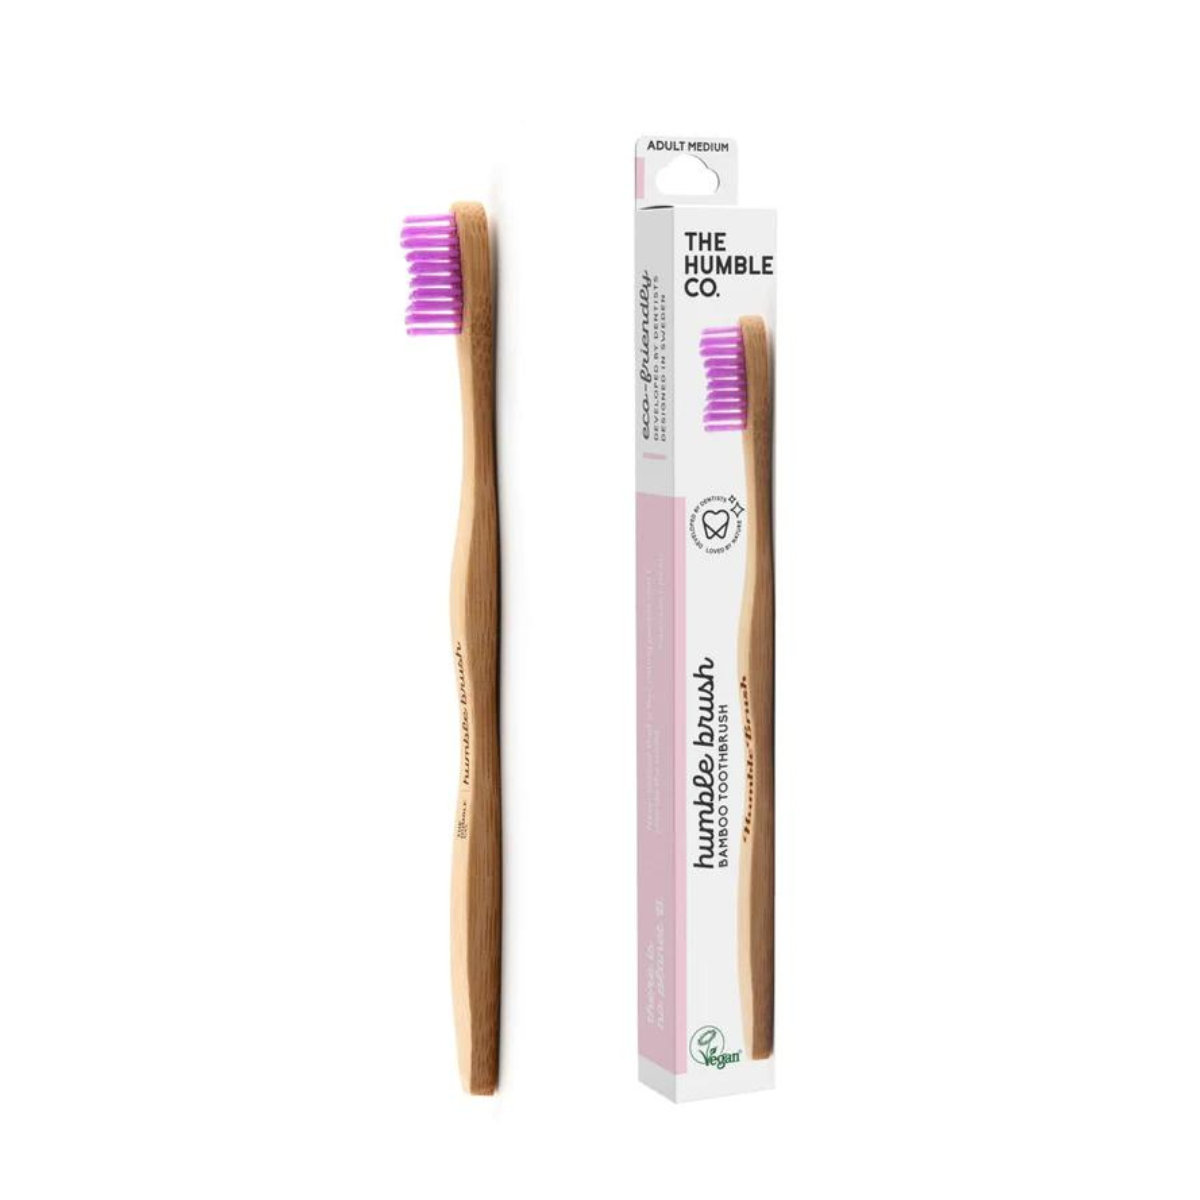 Brosse a dent bambou - Rose - Medium - THE HUMBLE CO